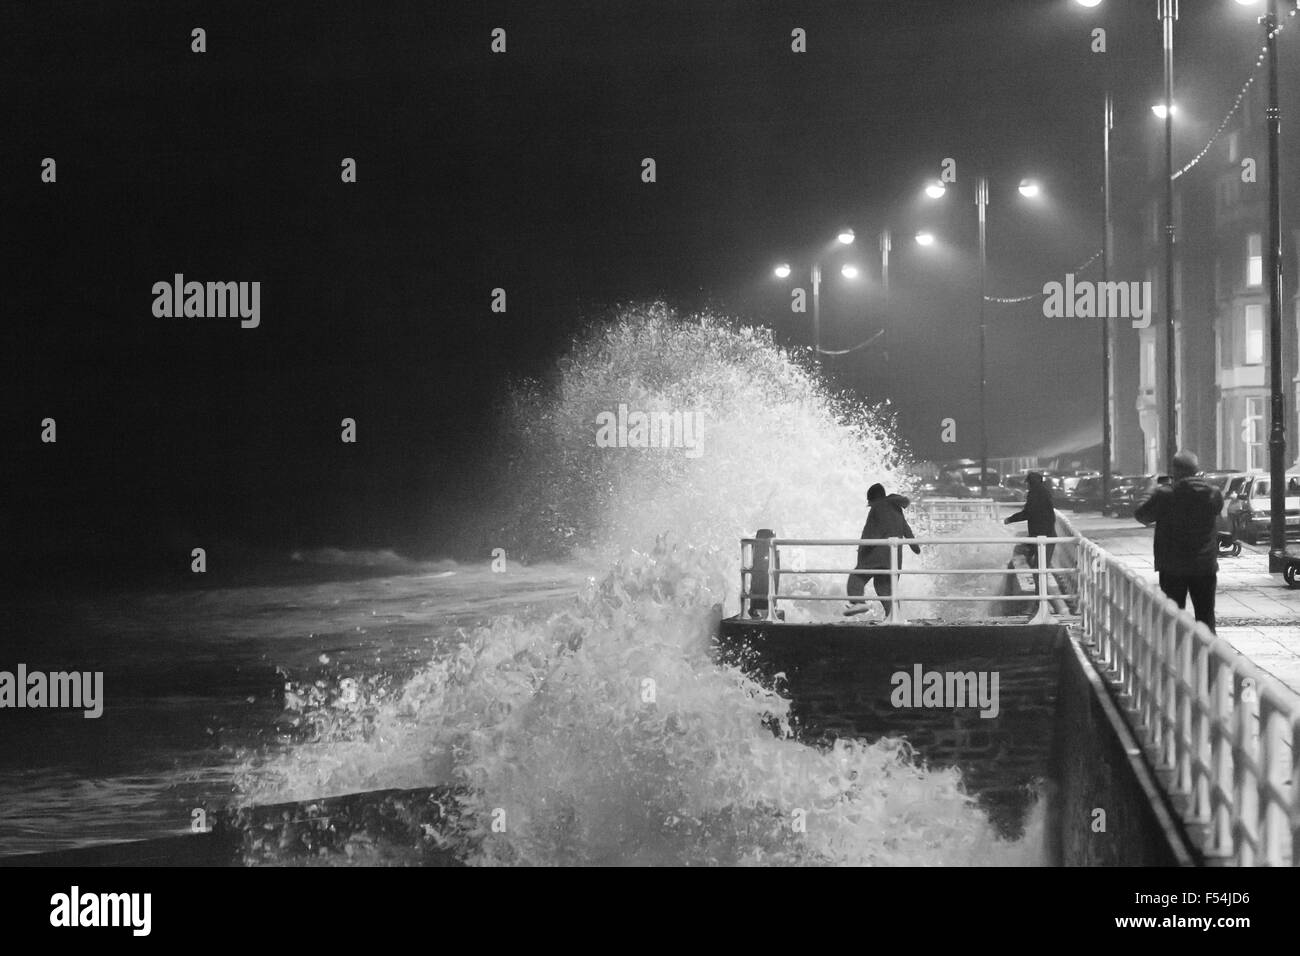 Aberystwyth, Wales, UK. 27th October, 2015. Teenagers take risks as the waves at high tide this evening crash against the promenade in Aberystwyth, while others enjoy the view from a safe distance. Credit:  Ian Jones/Alamy Live News Stock Photo